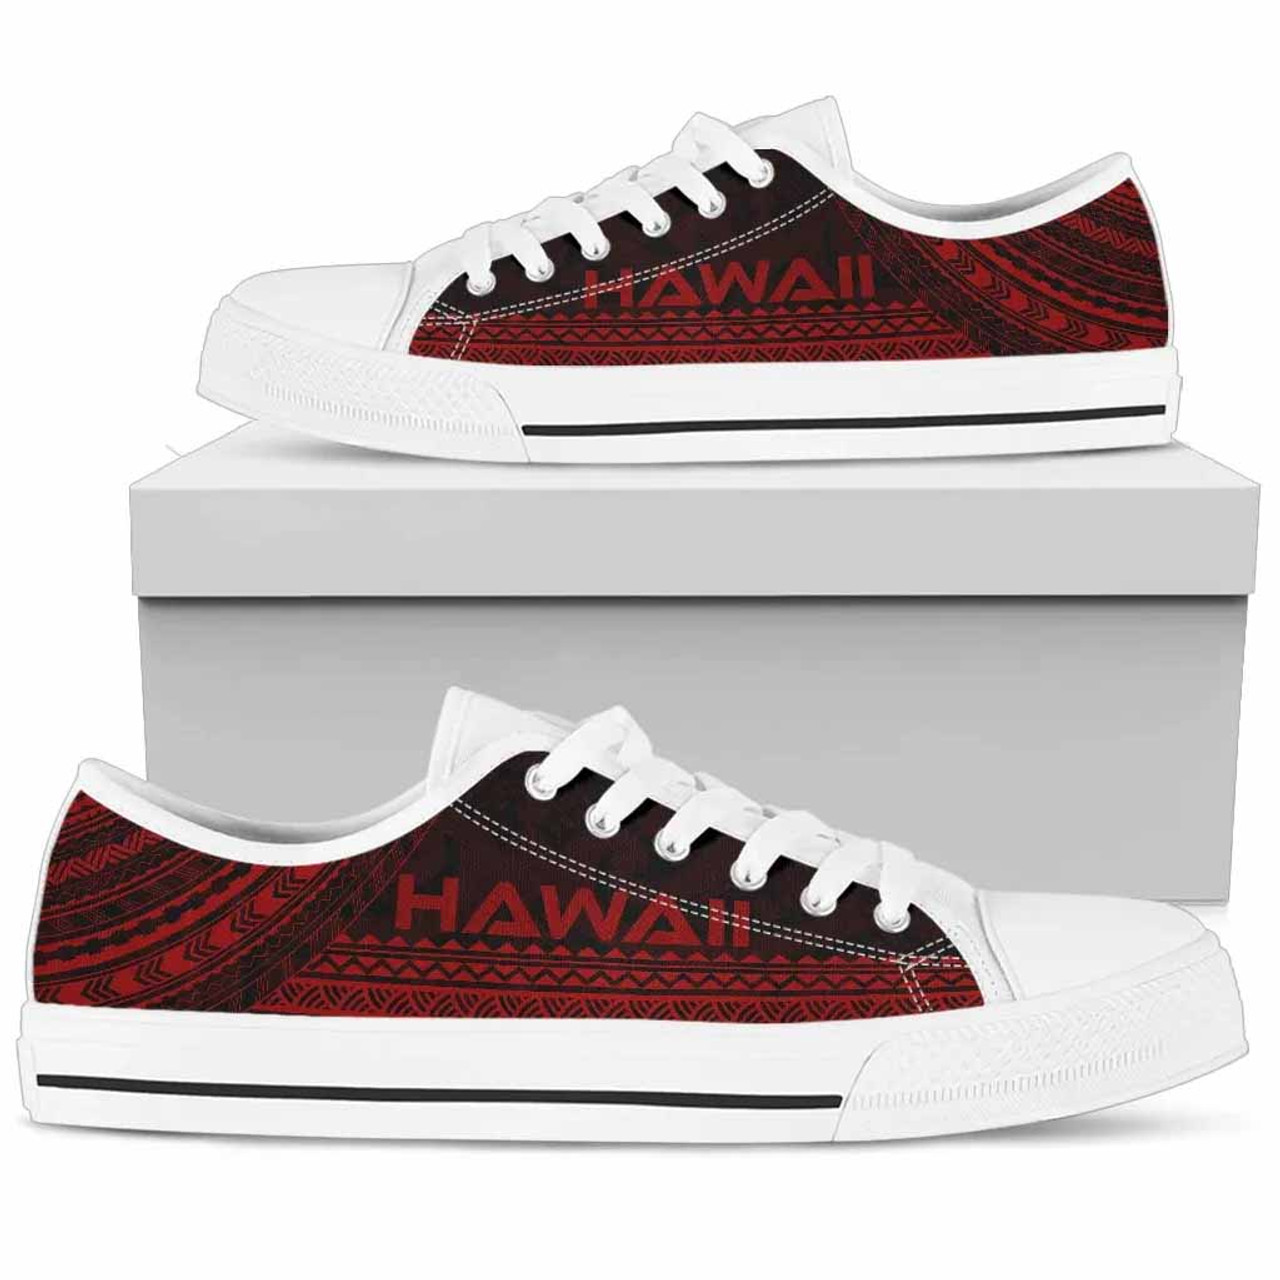 Hawaii Low Top Shoes - Polynesian Red Chief Version 1